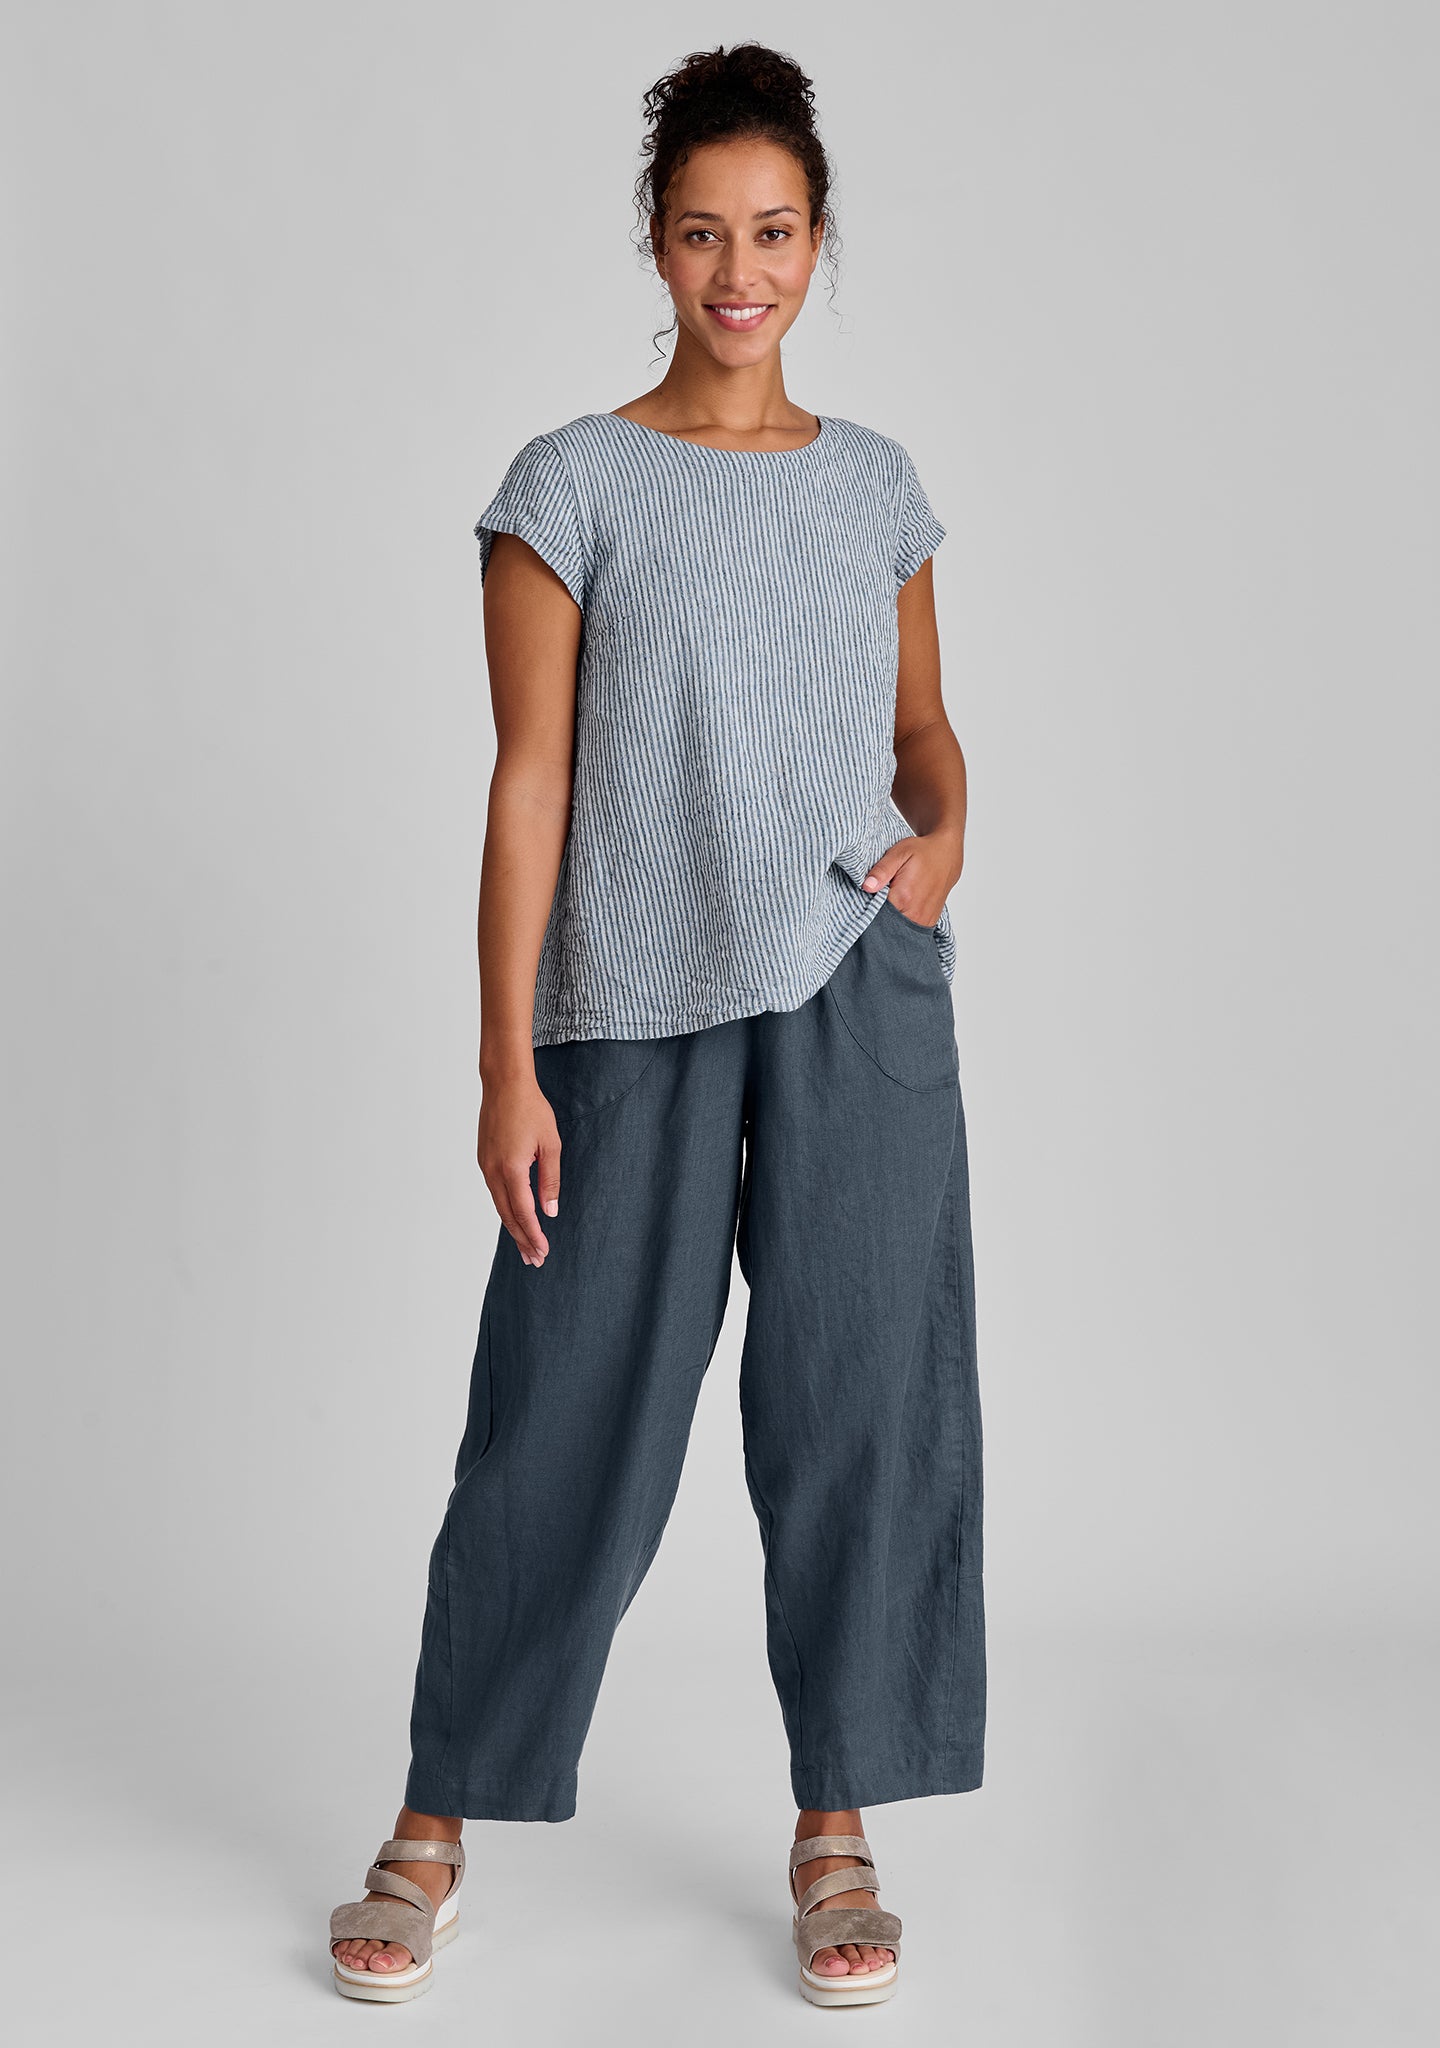 FLAX linen tee shirt in blue with linen pants in blue